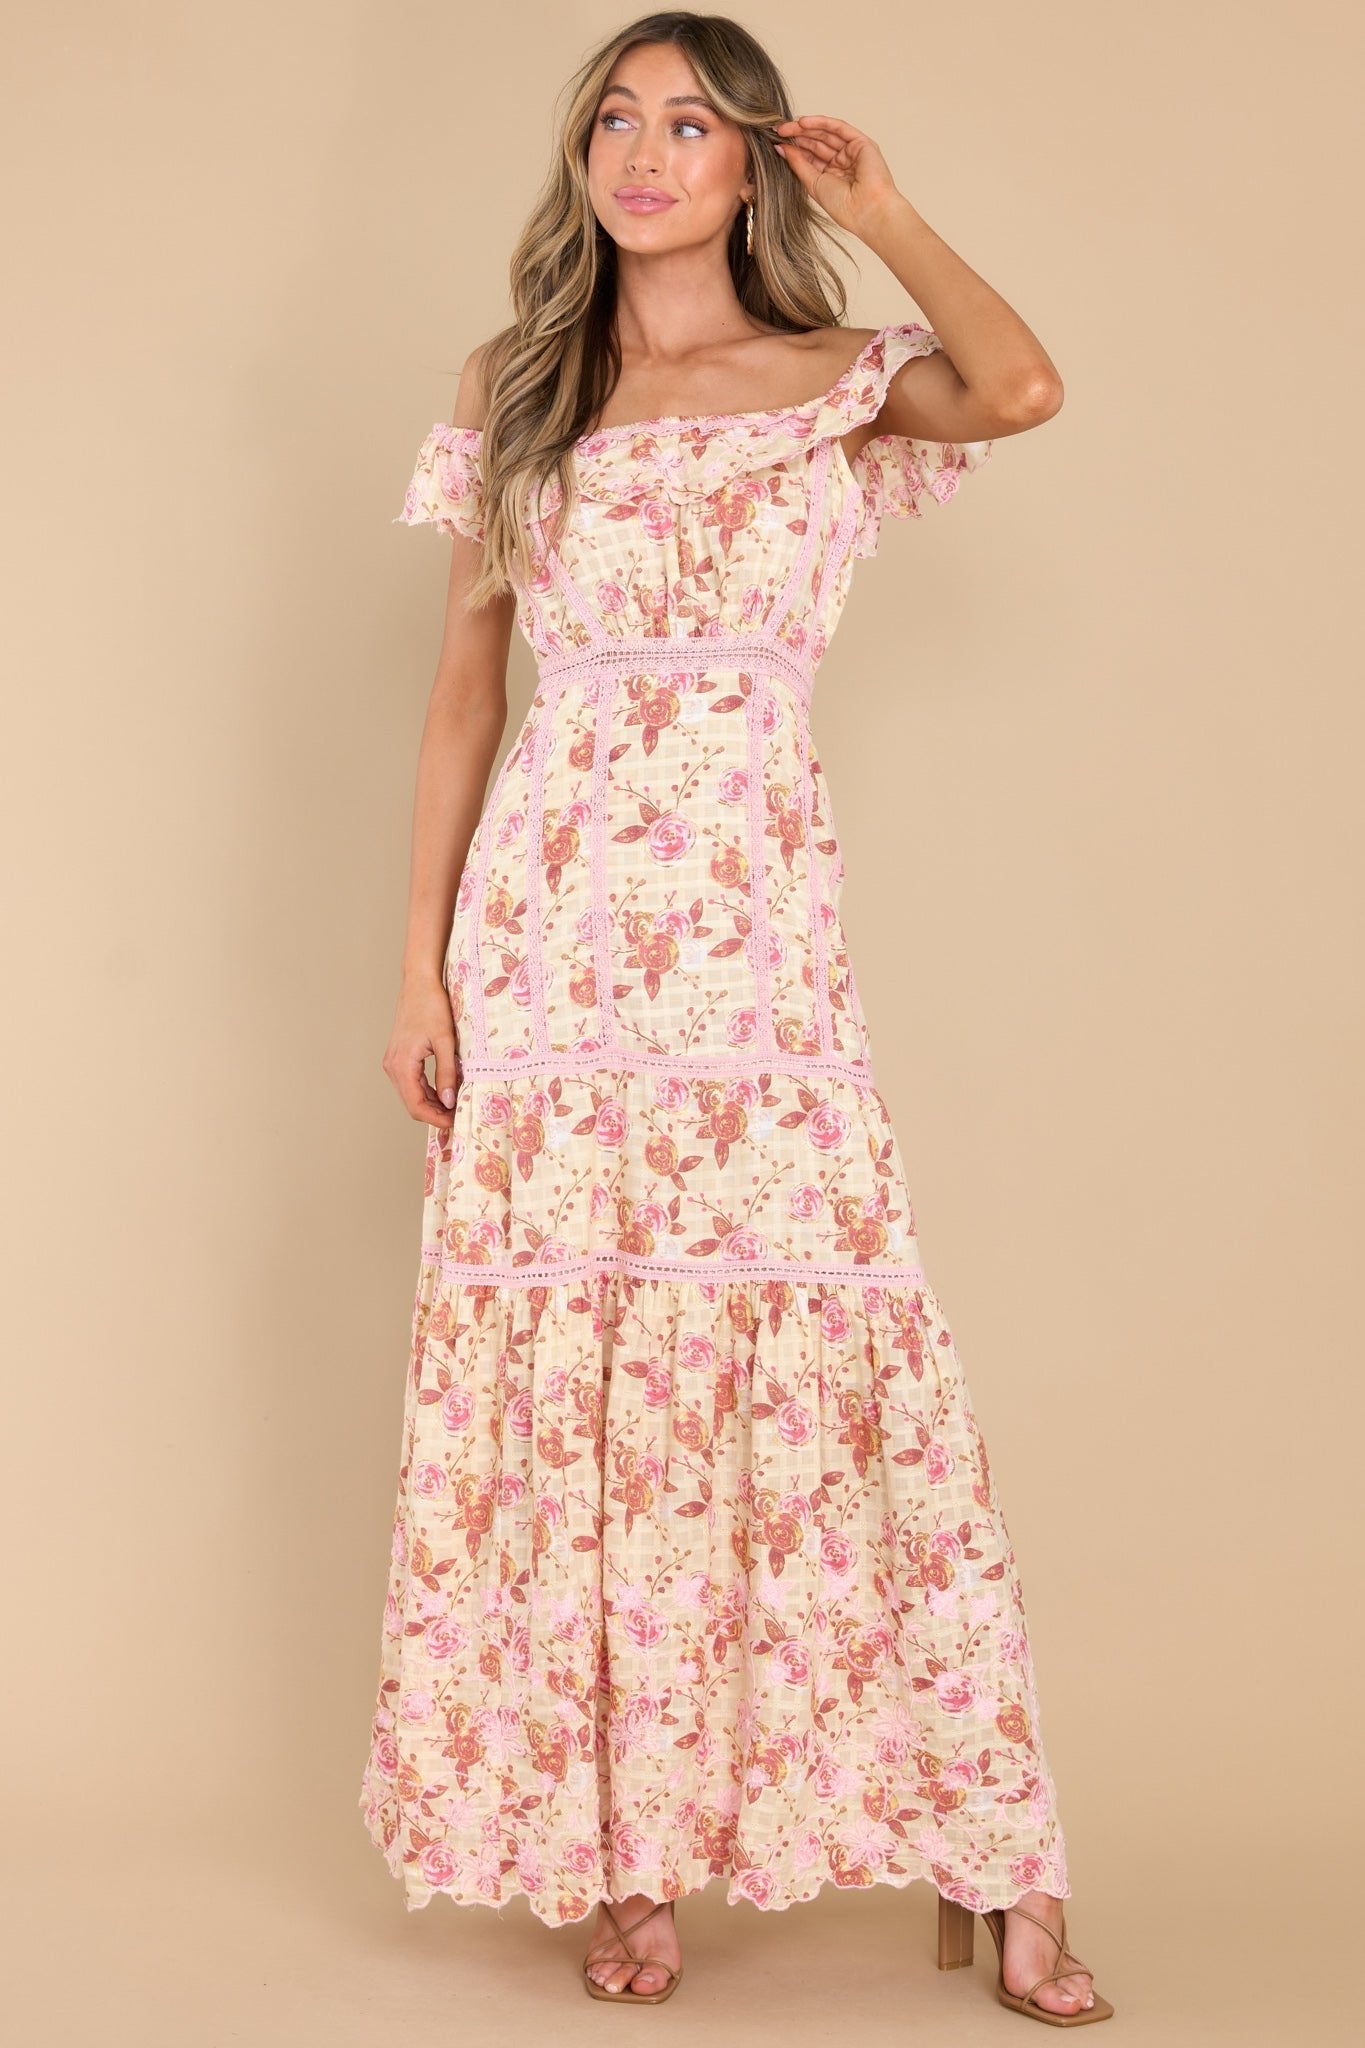 My Wildest Dreams Coral Floral Print Maxi Dress - Red Dress